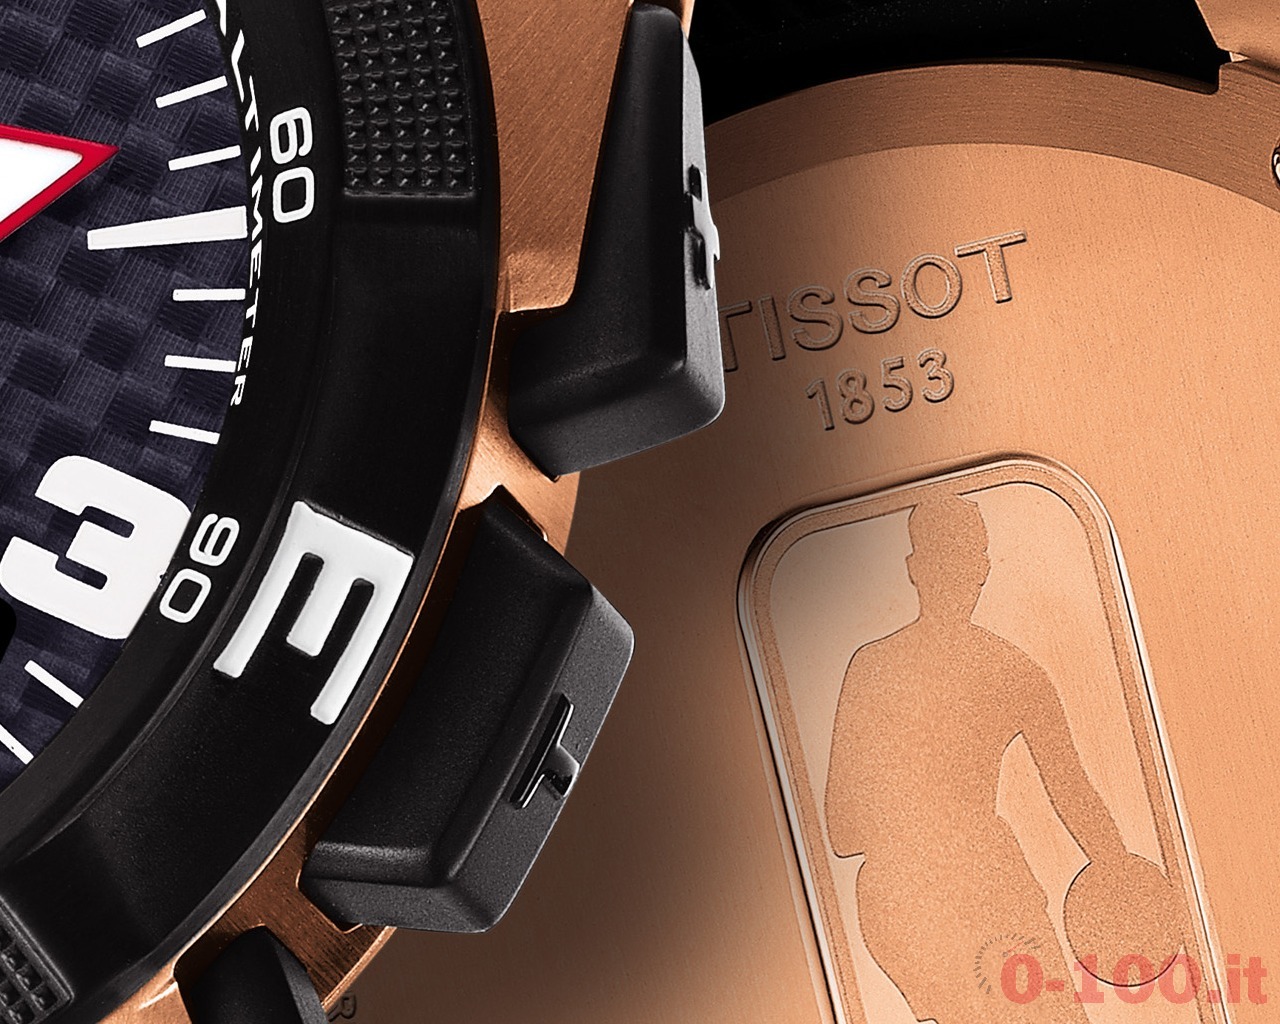 Tissot_T-Touch_Expert_Solar_NBA_Special_Edition_T091_420_4fafs7_207_00_MT (2)